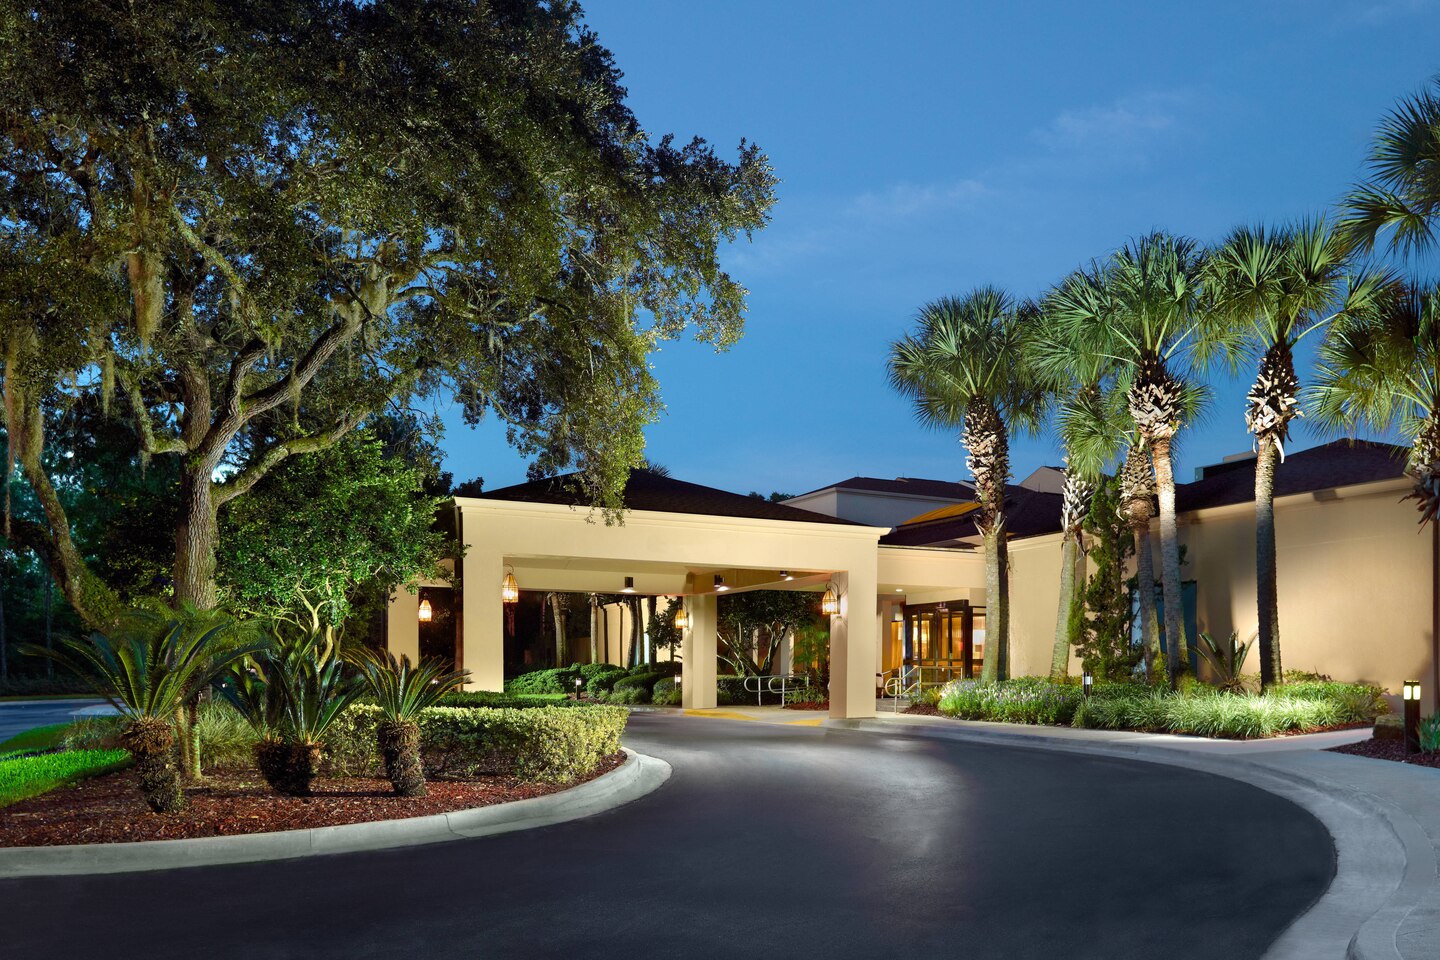 Courtyard by Marriott Jacksonville Mayo Clinic Campus/Beaches